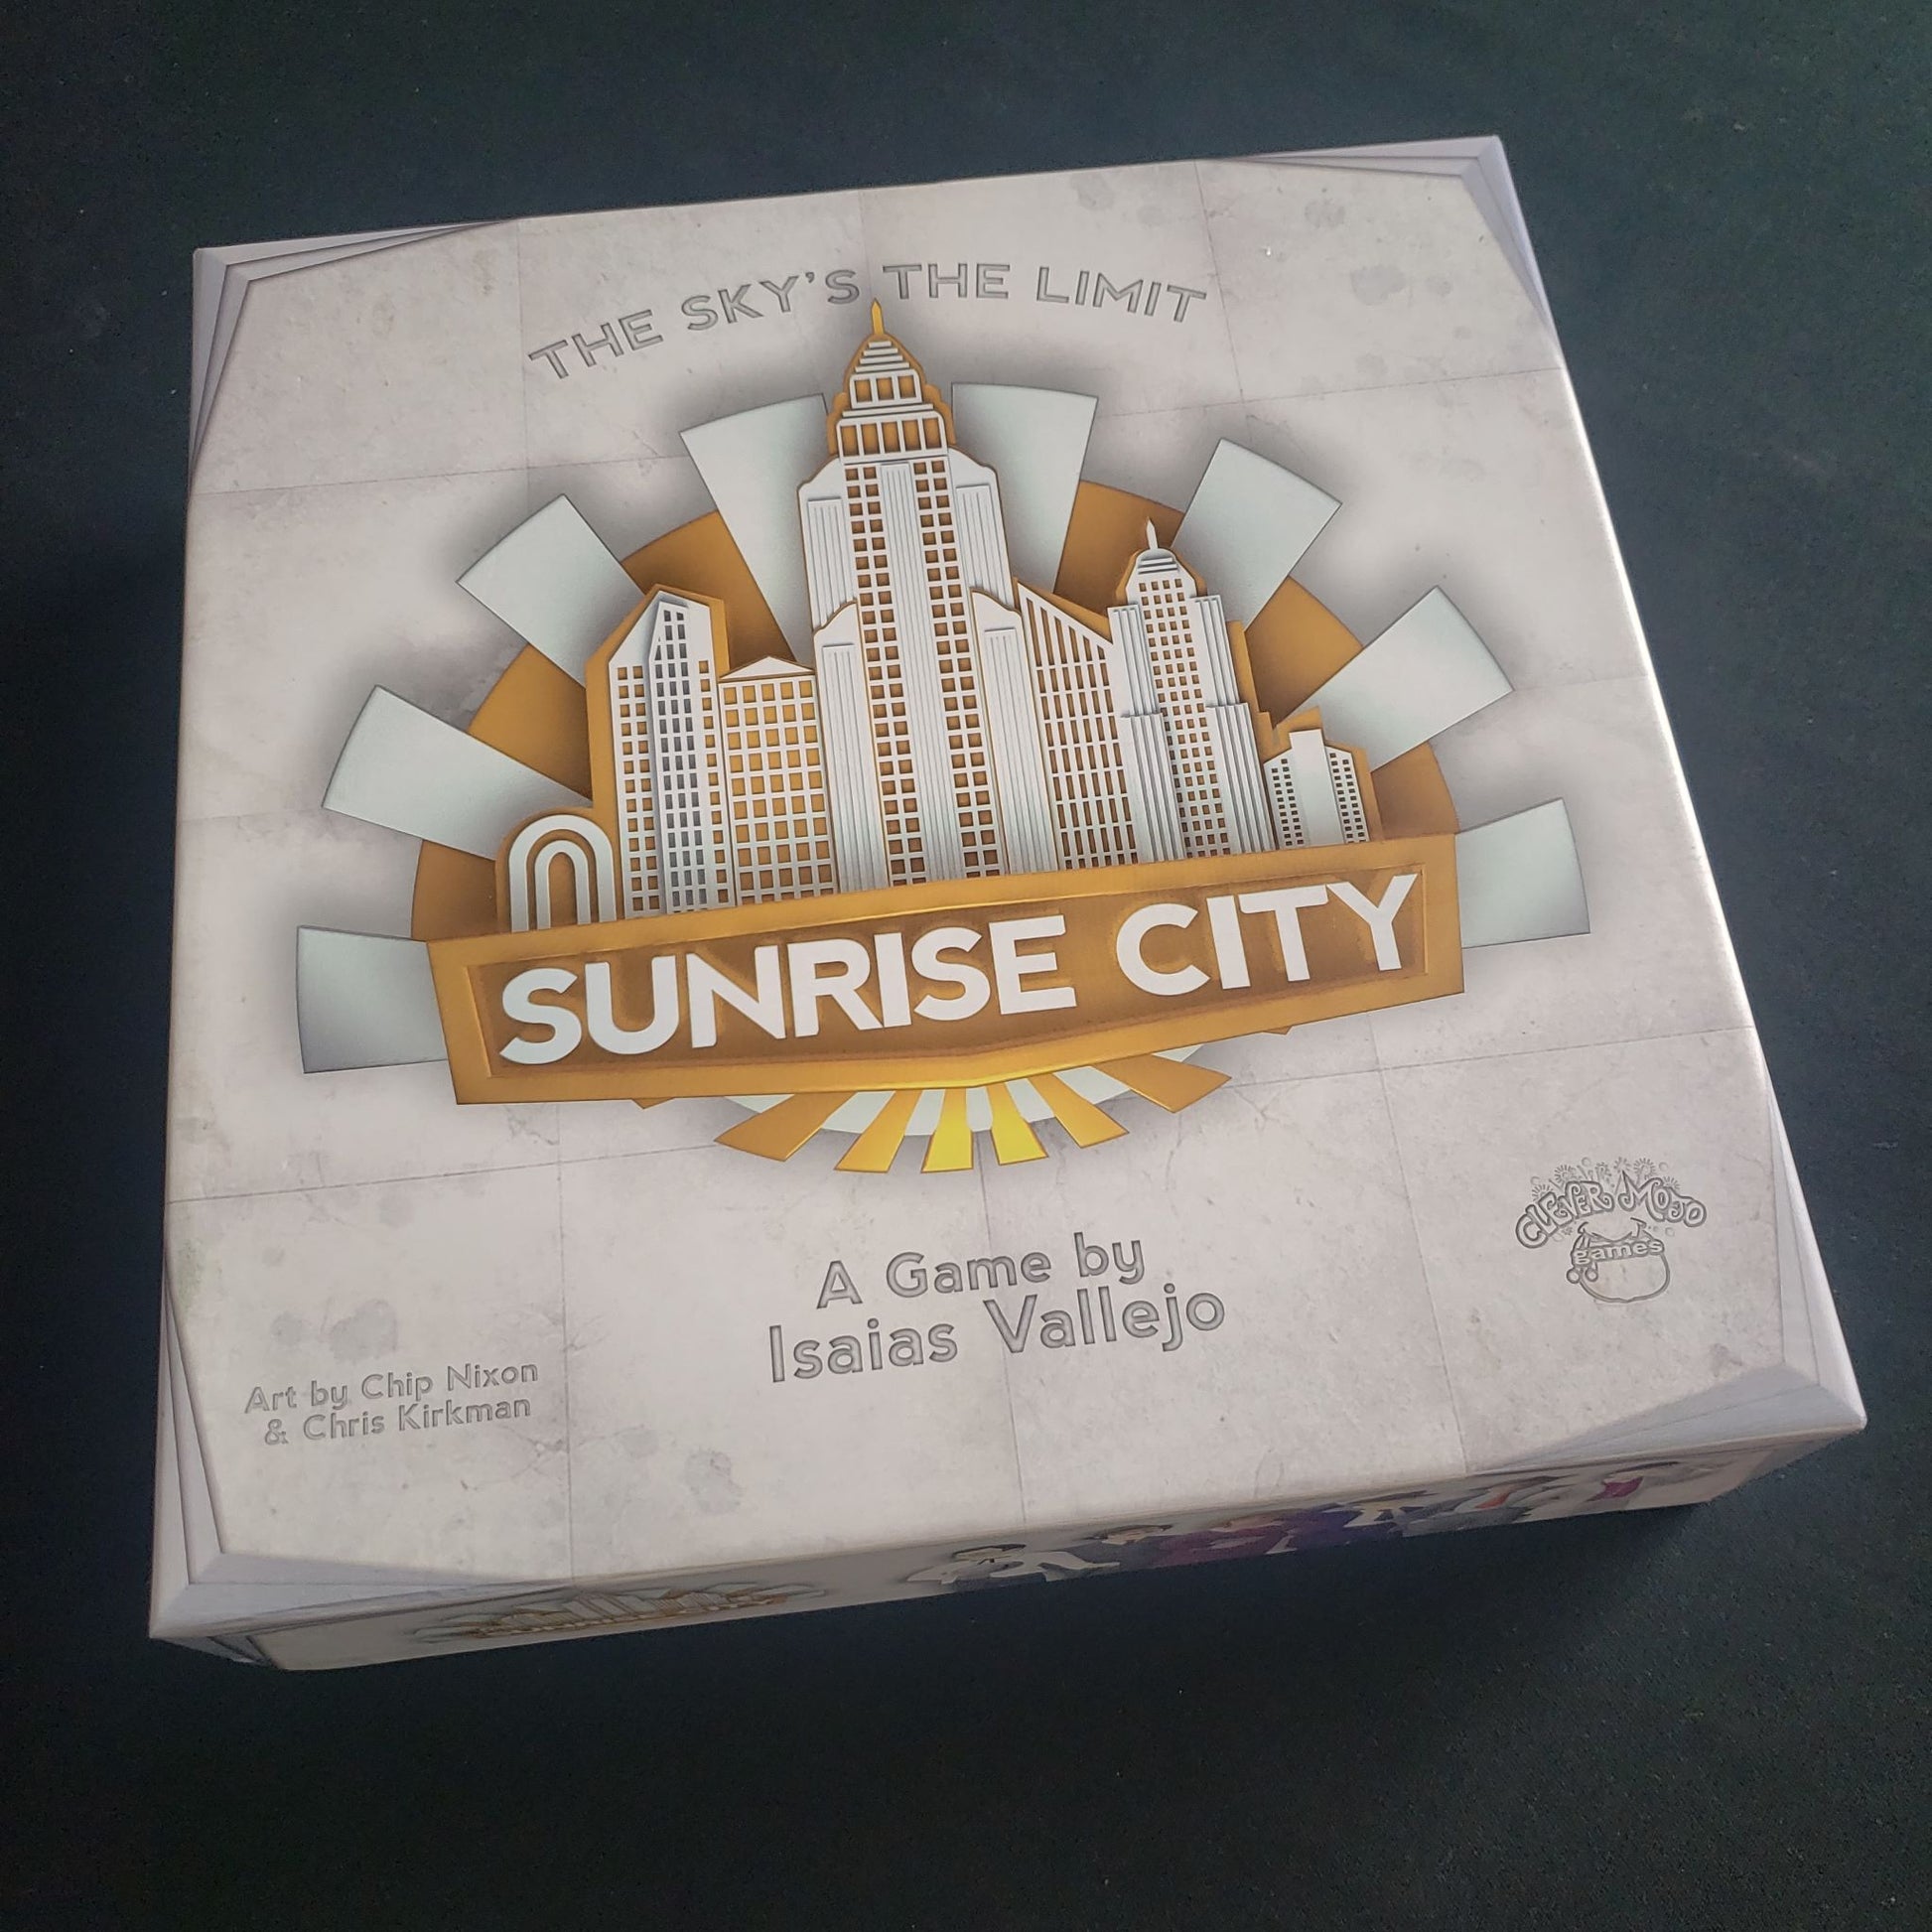 Sunrise City board game - front cover of box